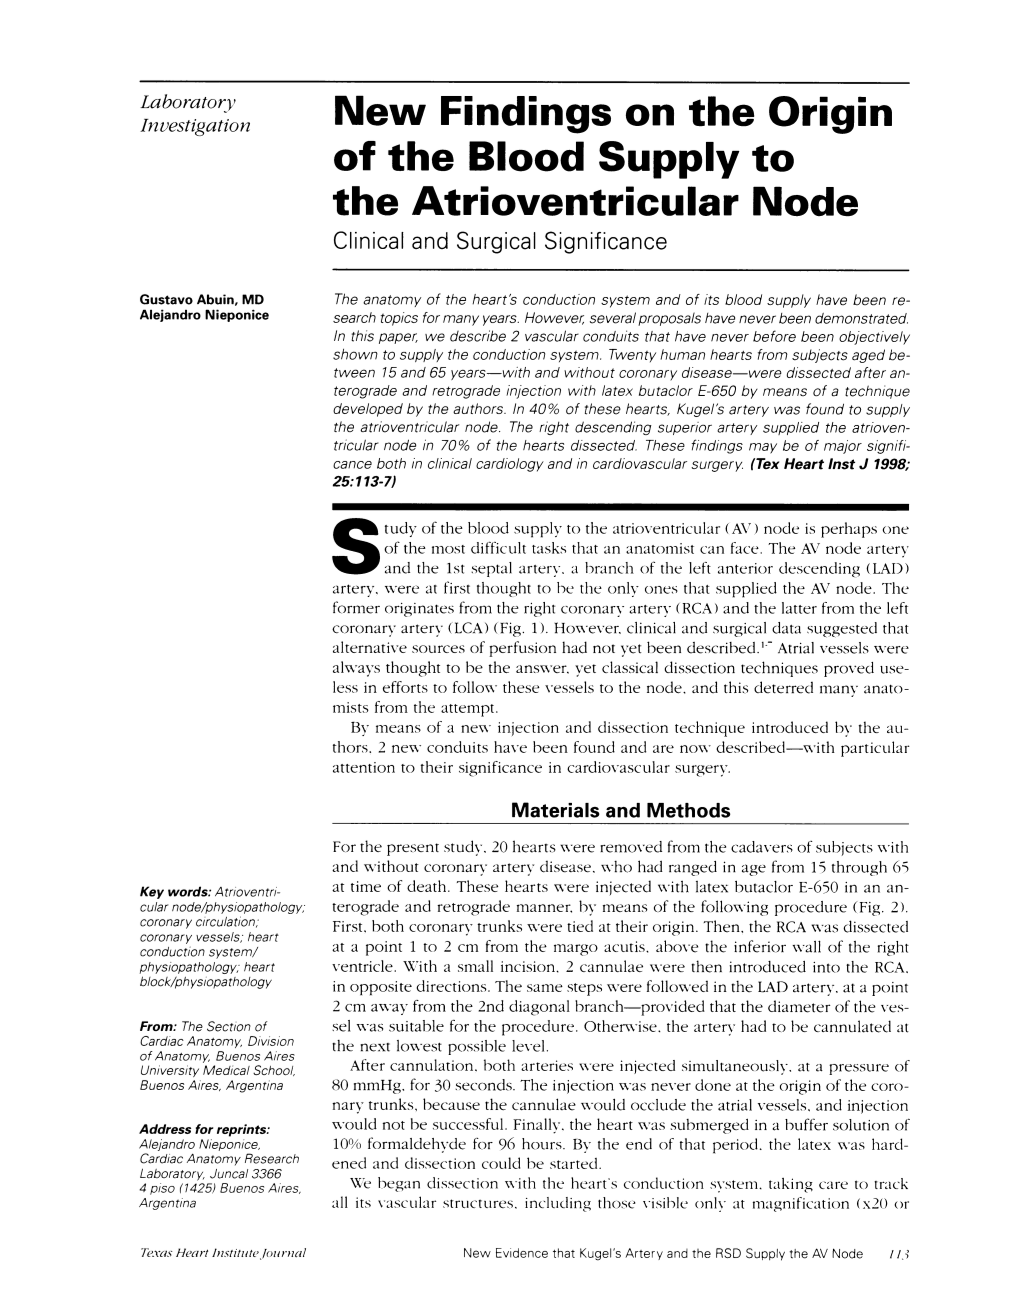 New Findings on the Origin the Atrioventricular Node